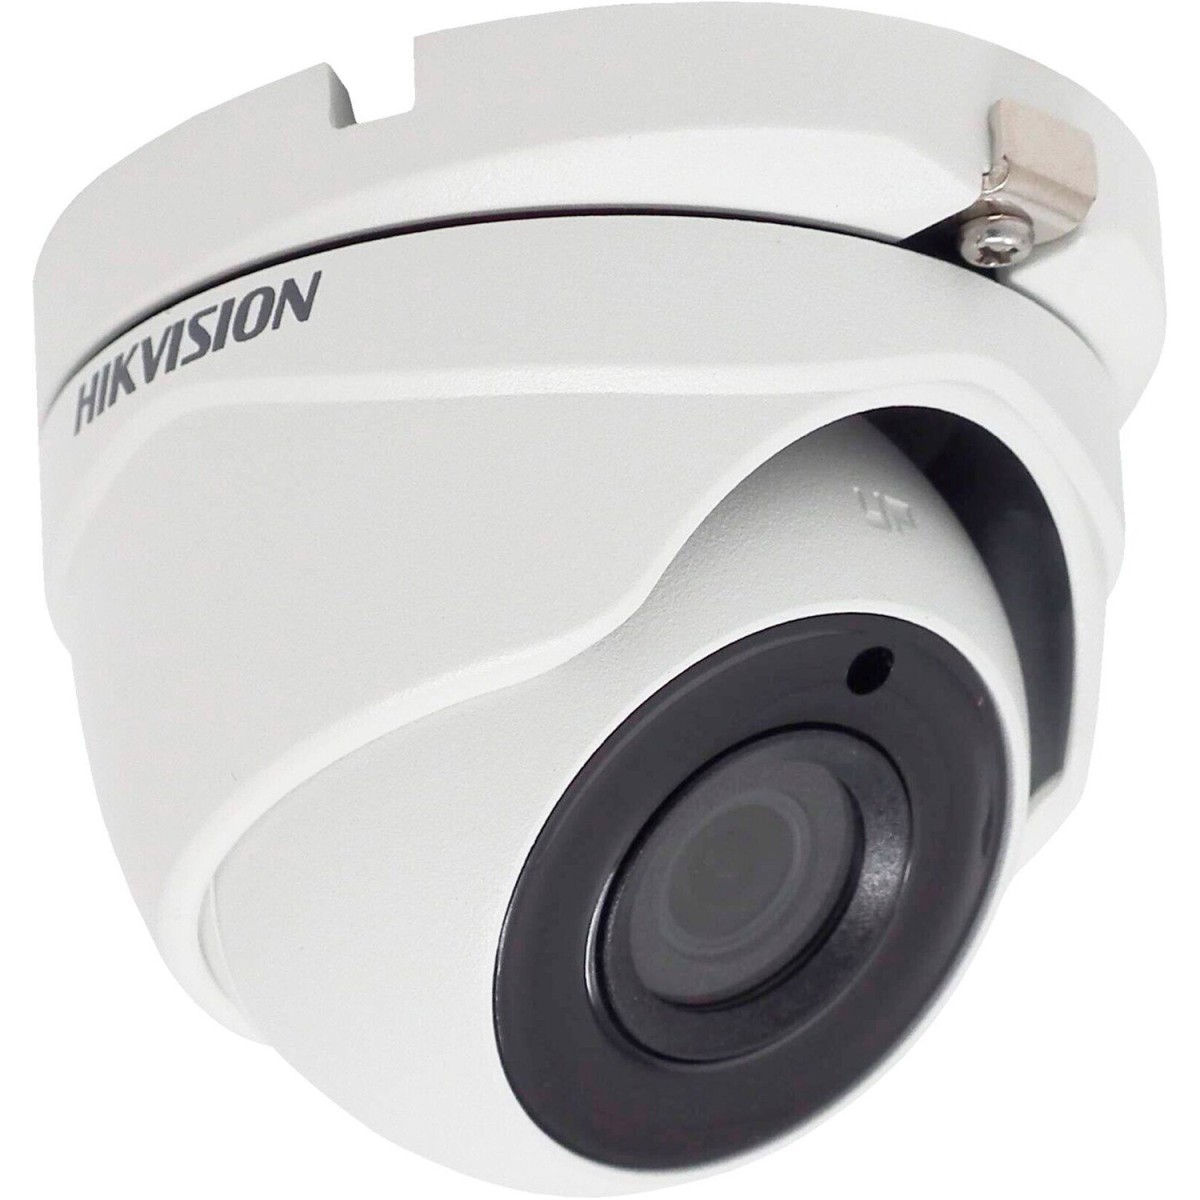 IP-камера Hikvision DS-2CE56H0T-ITME (2.8) 256_256.jpg